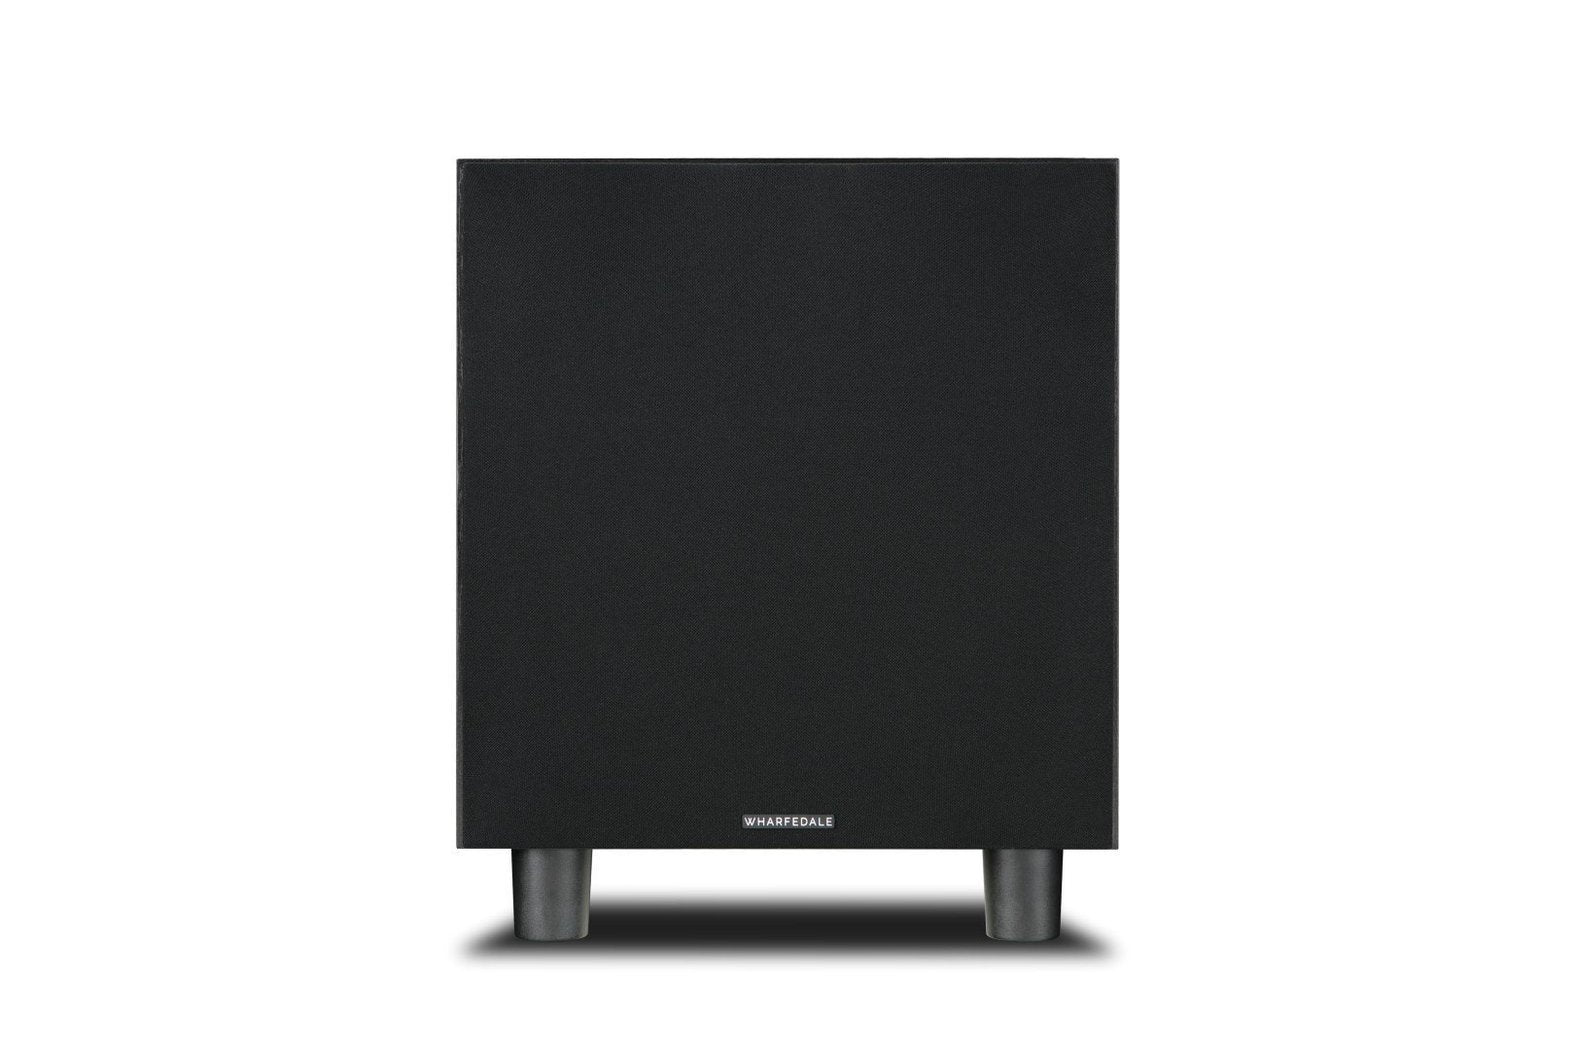 Wharfedale SW-12 active subwoofer